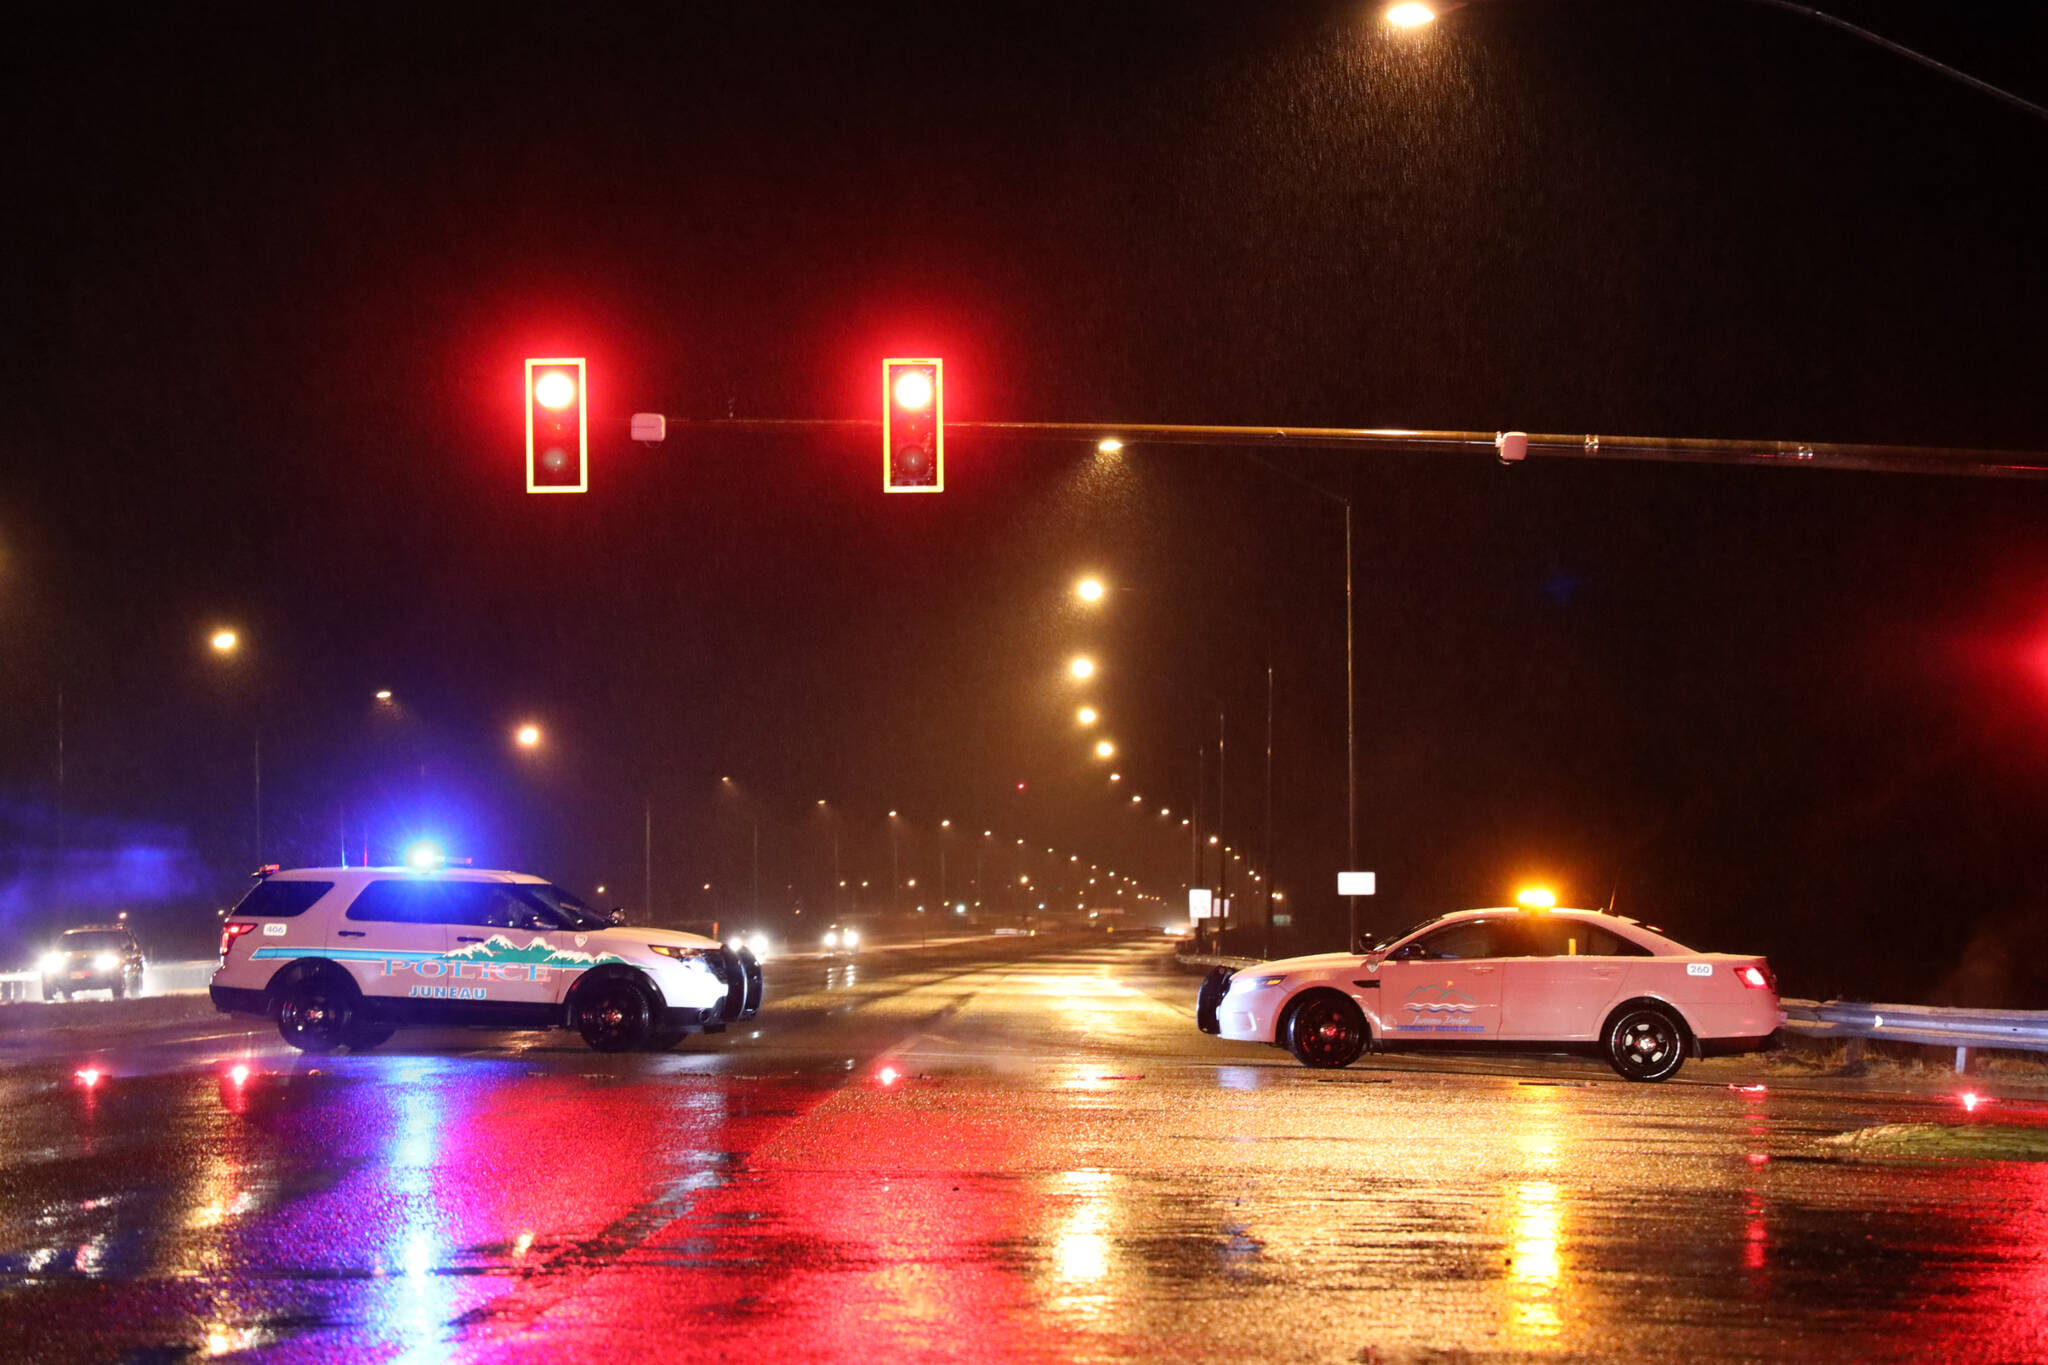 Police vehicles block Egan Drive going toward the Mendenhall Valley after a multi-vehicle wreck Wednesday evening. (Clarise Larson / Juneau Empire)